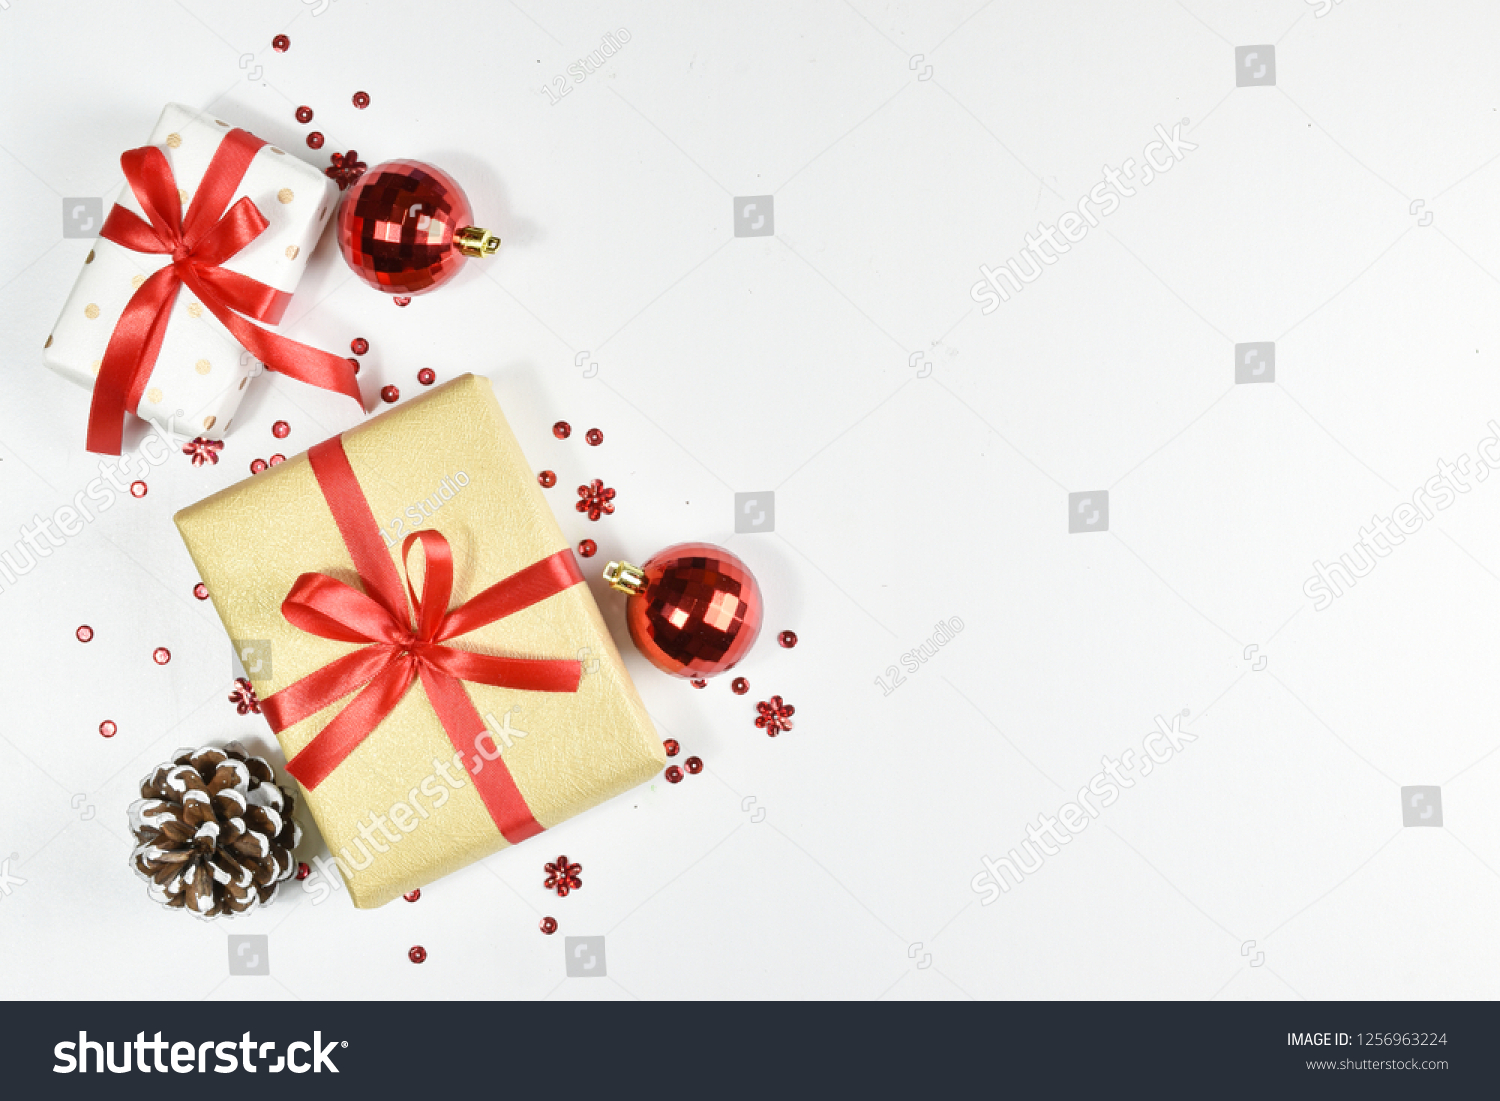 Christmas background. Top view of Christmas decorations. Flat lay of creative design on white background. Copy space for text. #1256963224